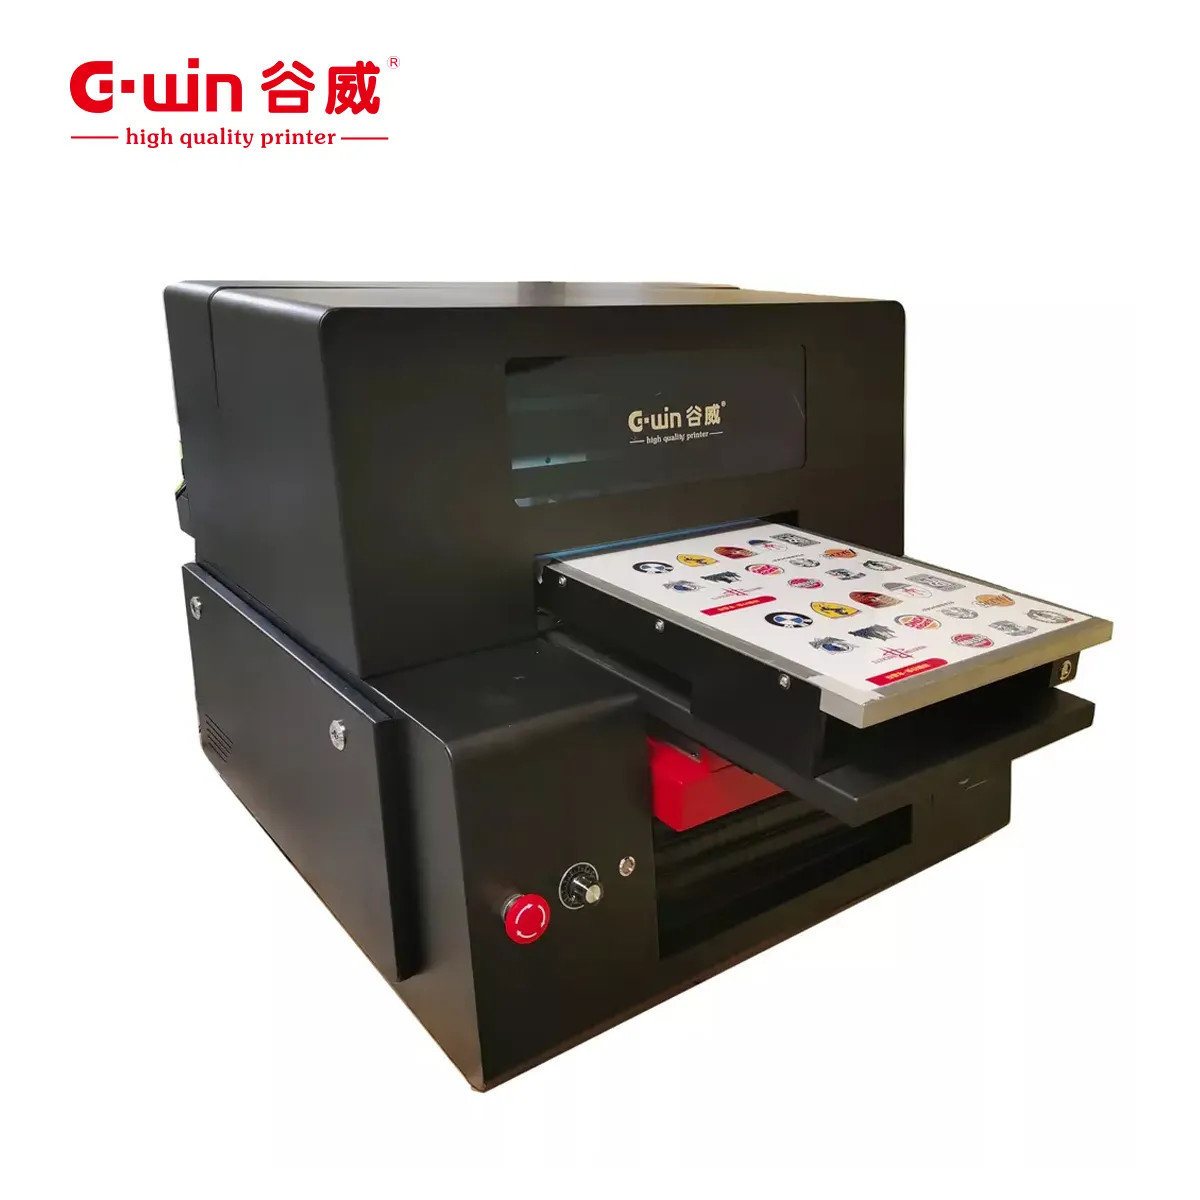 GWIN hot sale UV DTF with double xp600 print head printing machine A3 size UV DTF AB film printing flatbed printers